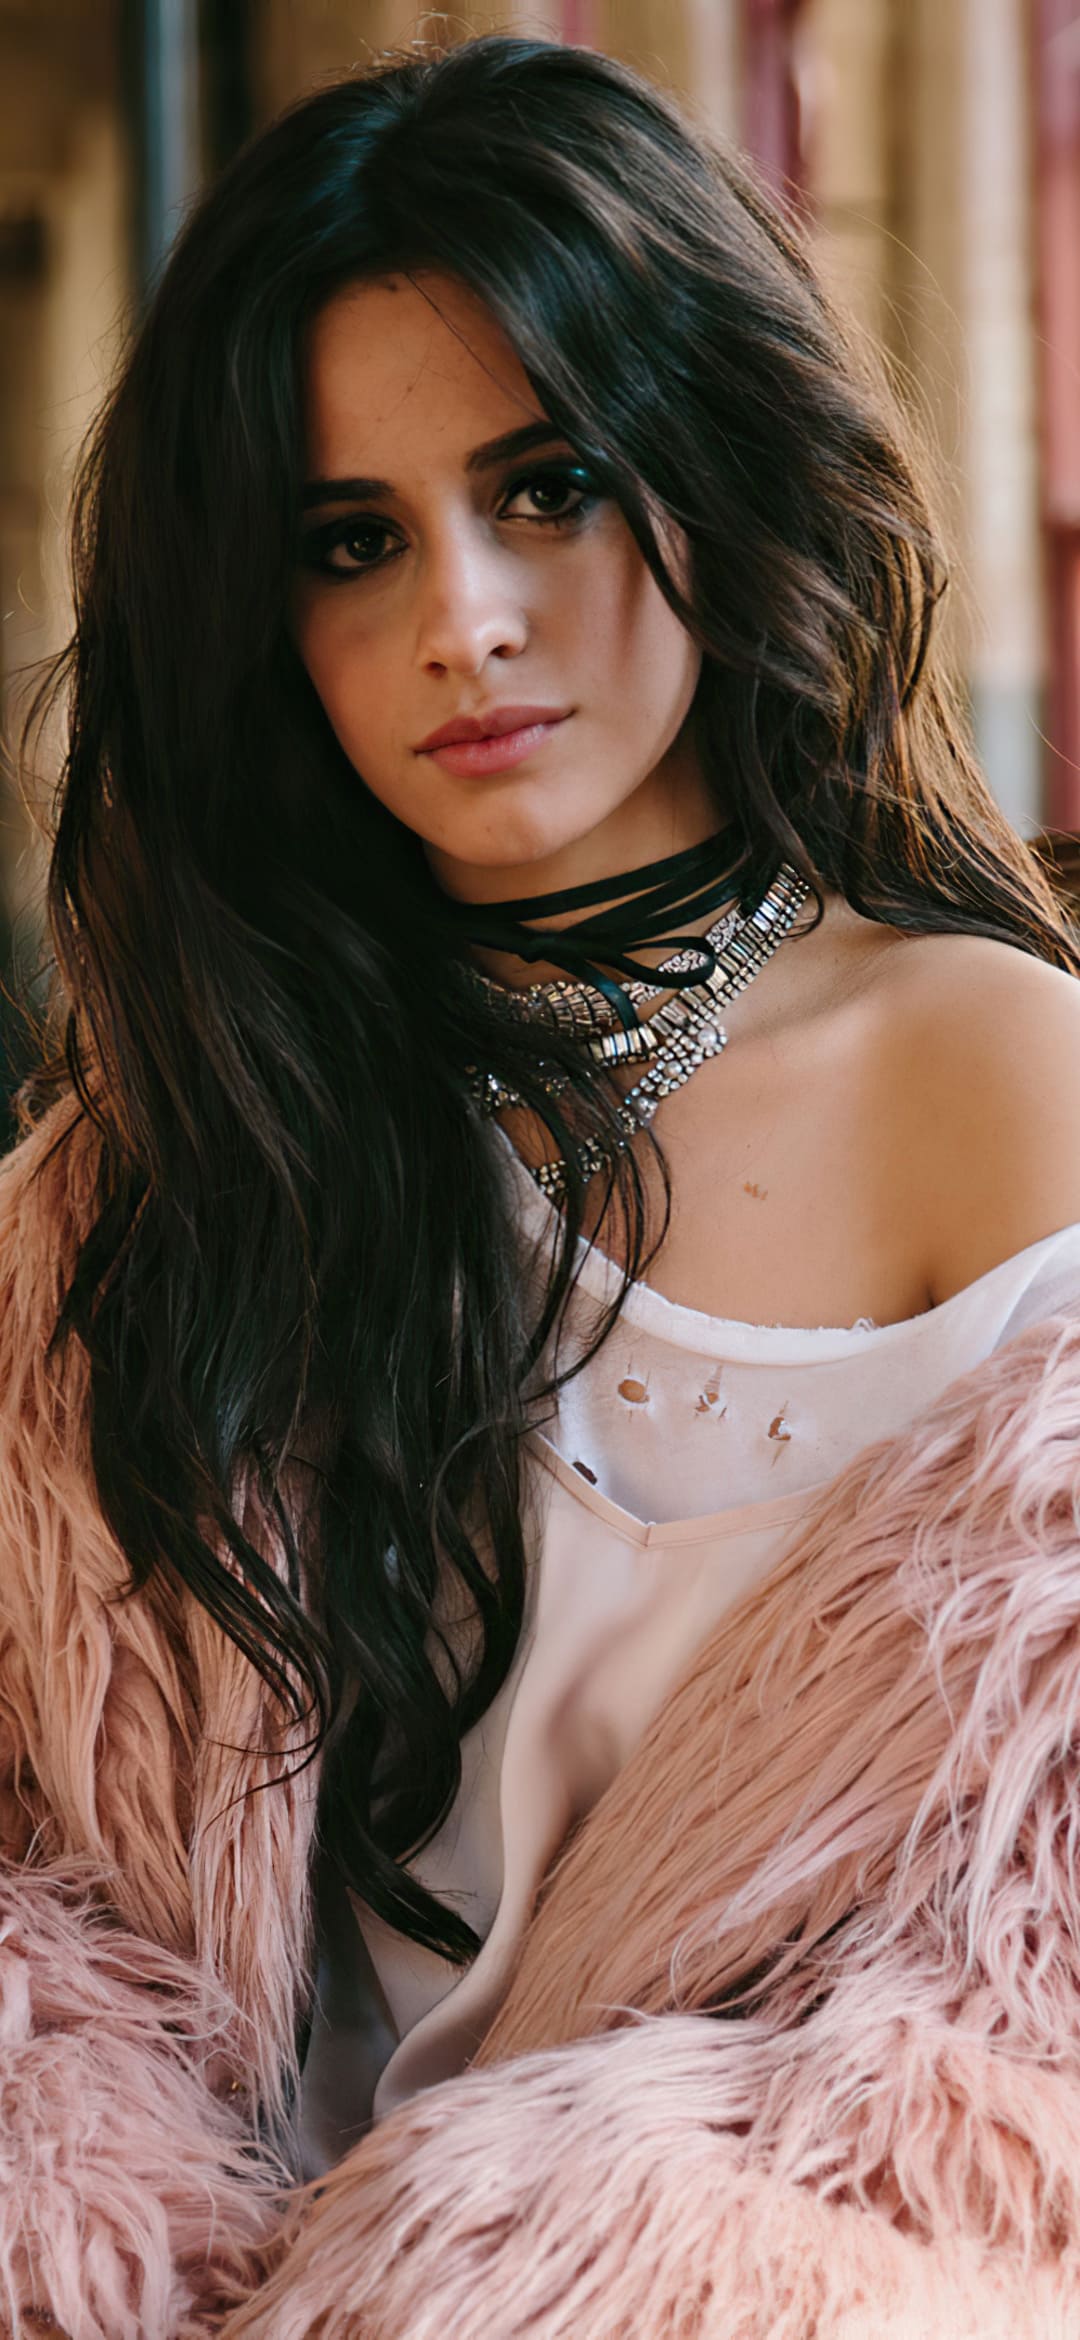 Camila Cabello Wallpapers - Top 35 Best